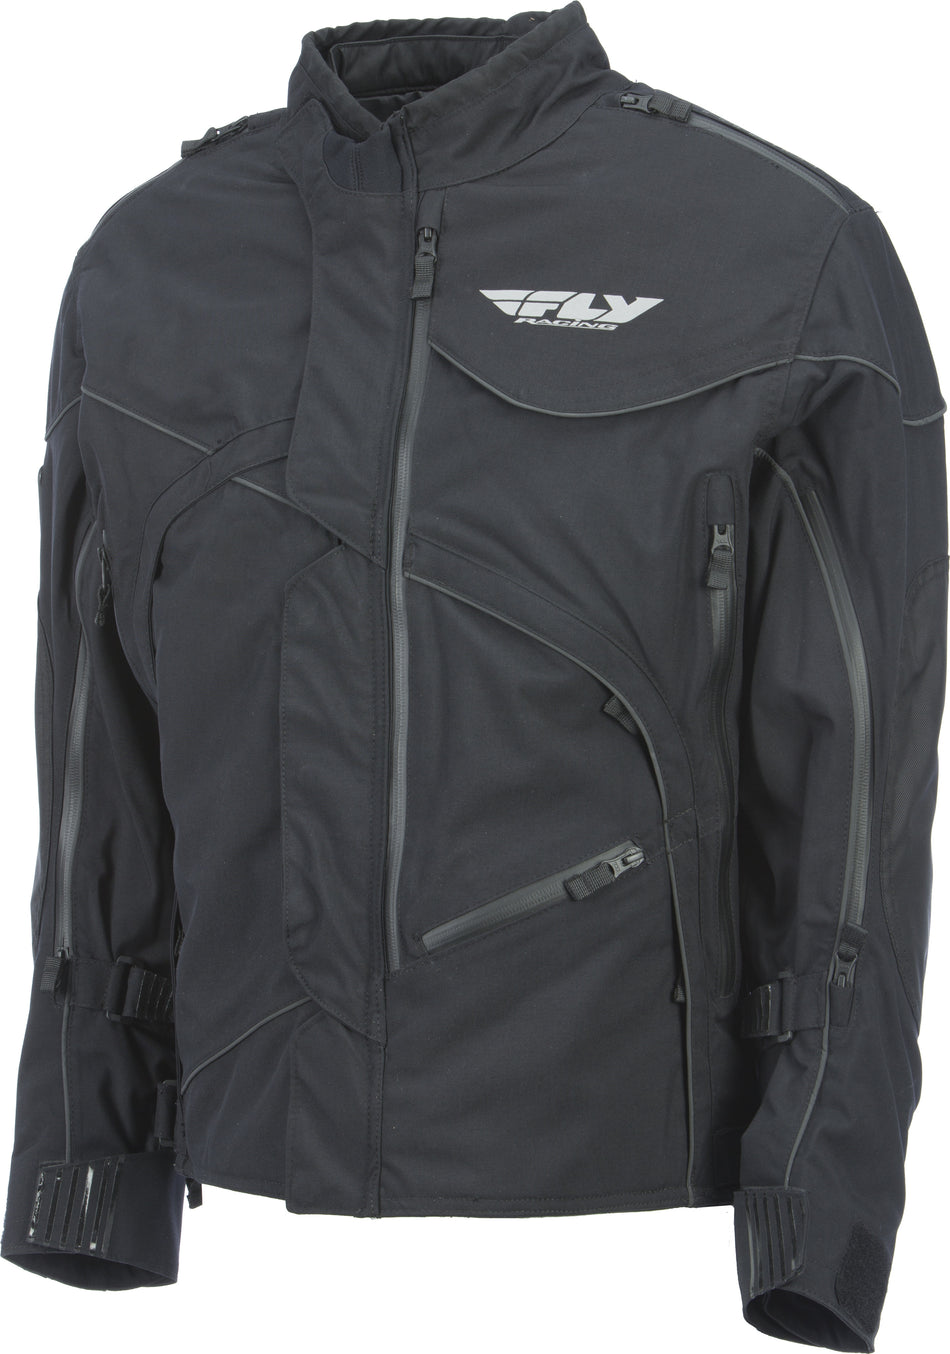 FLY RACING Fly Patrol Xc Jacket Blk Md 368-9200M